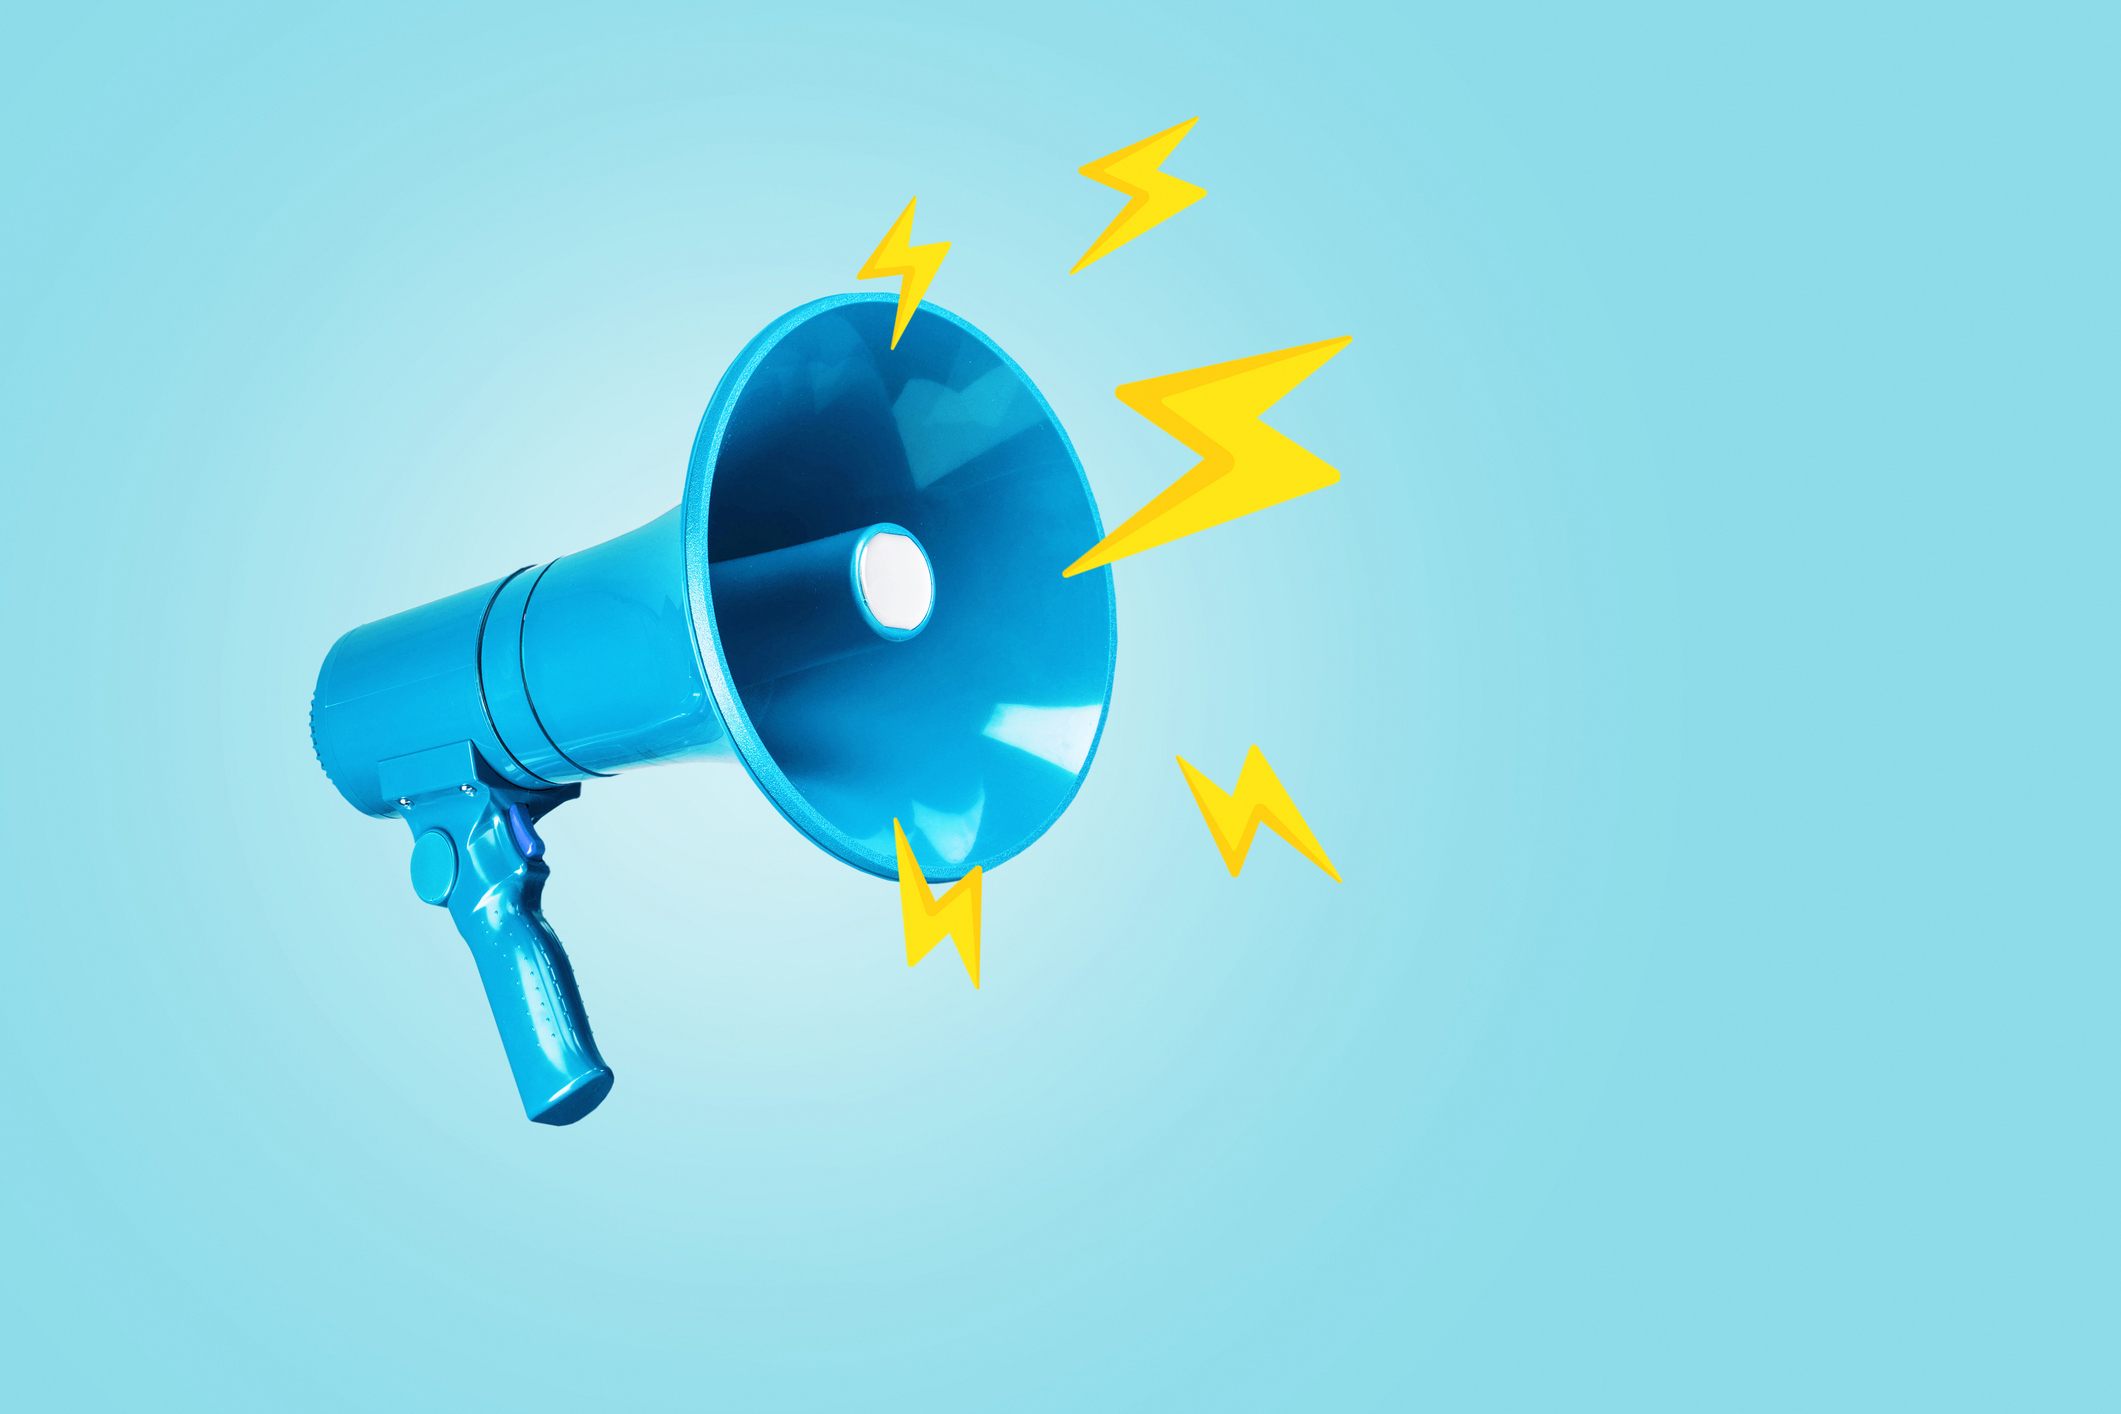 Creative blue loudspeaker with yellow lightning bolts on a blue background. Creative idea, attention! Urgent news. Lightning traffic, advertising and message.